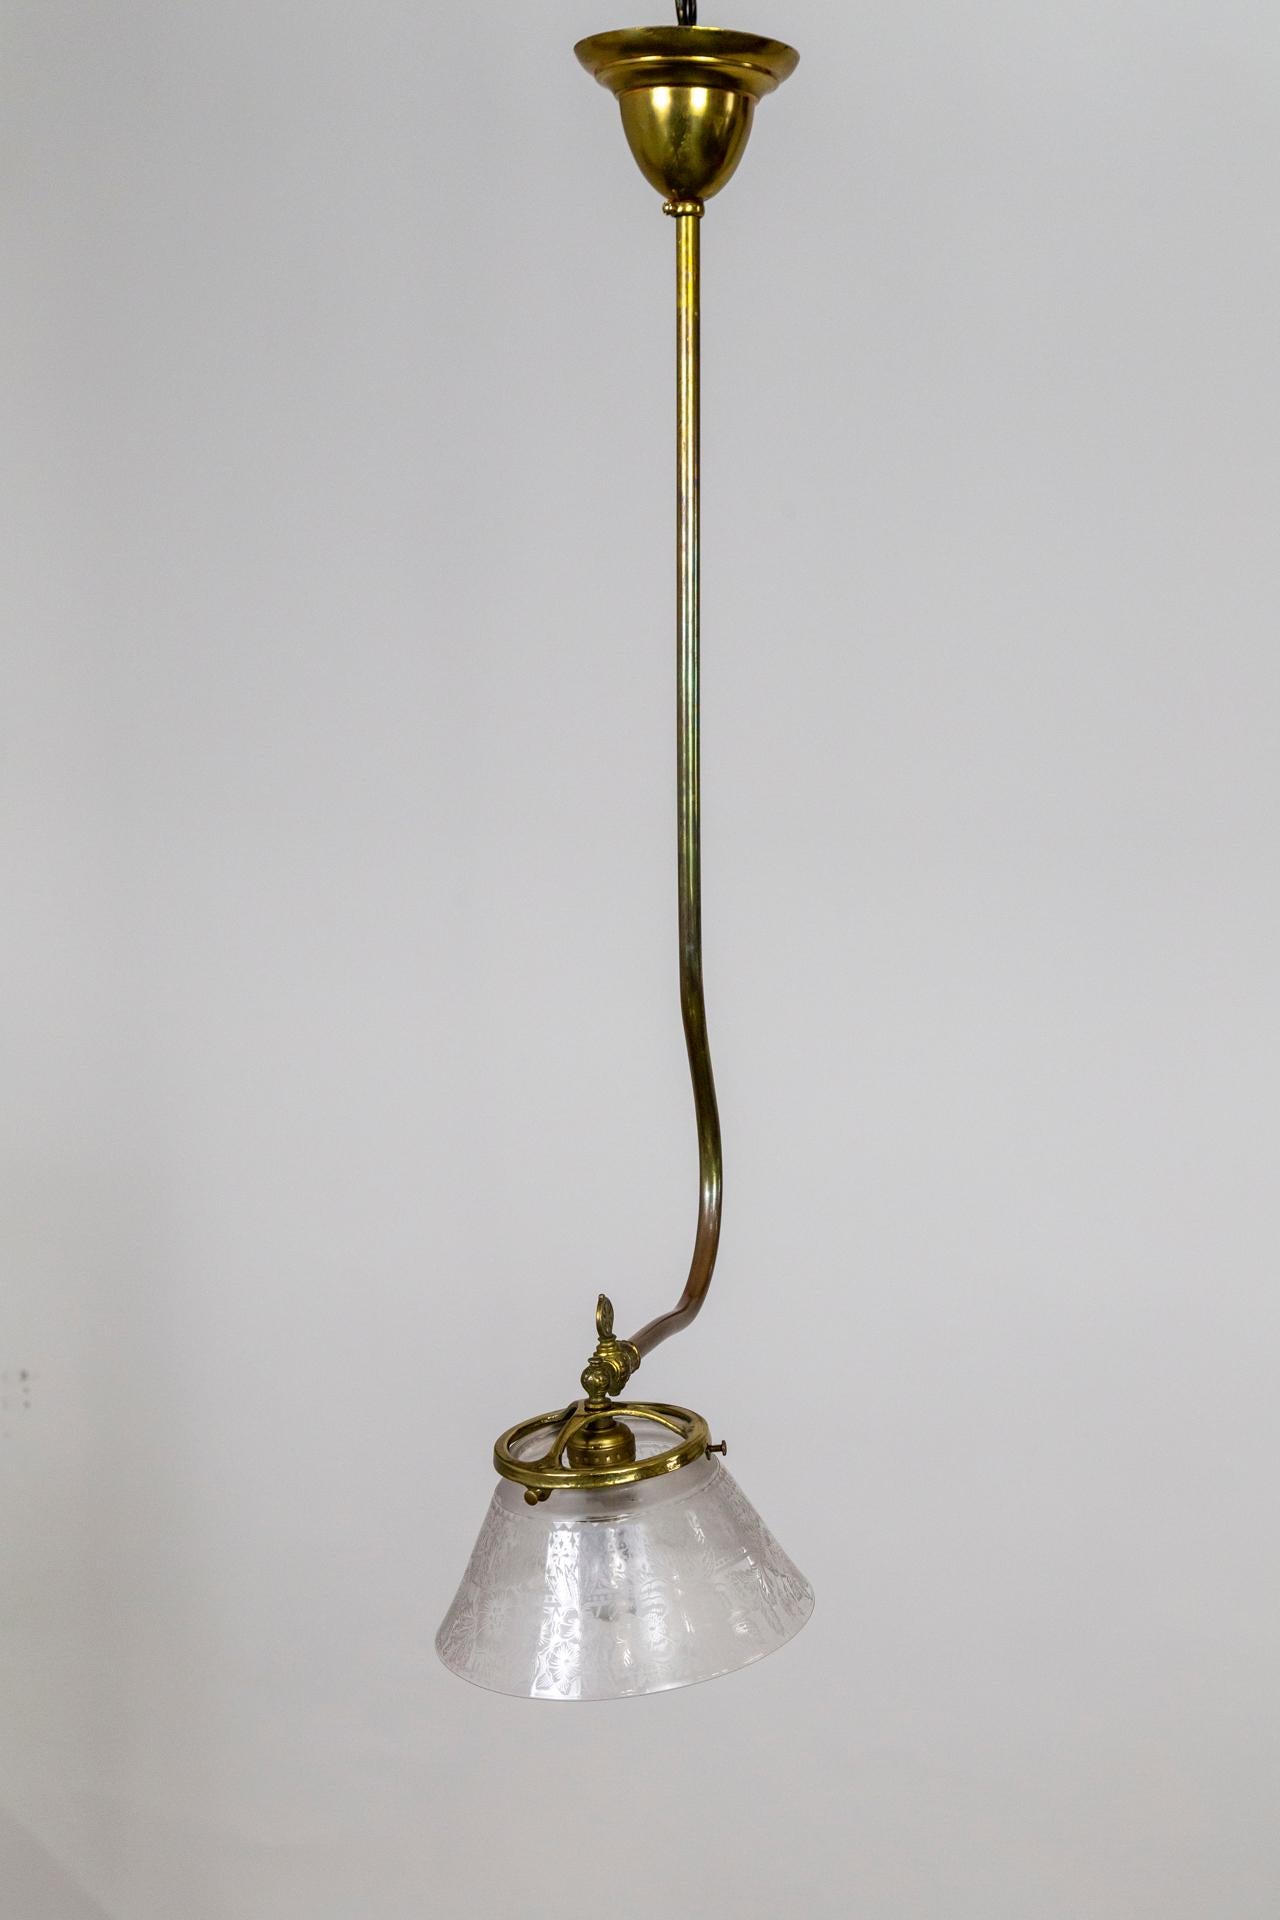 Victorian J-Style Ceiling Light Fixture w/ Etched Glass Shade In Good Condition For Sale In San Francisco, CA